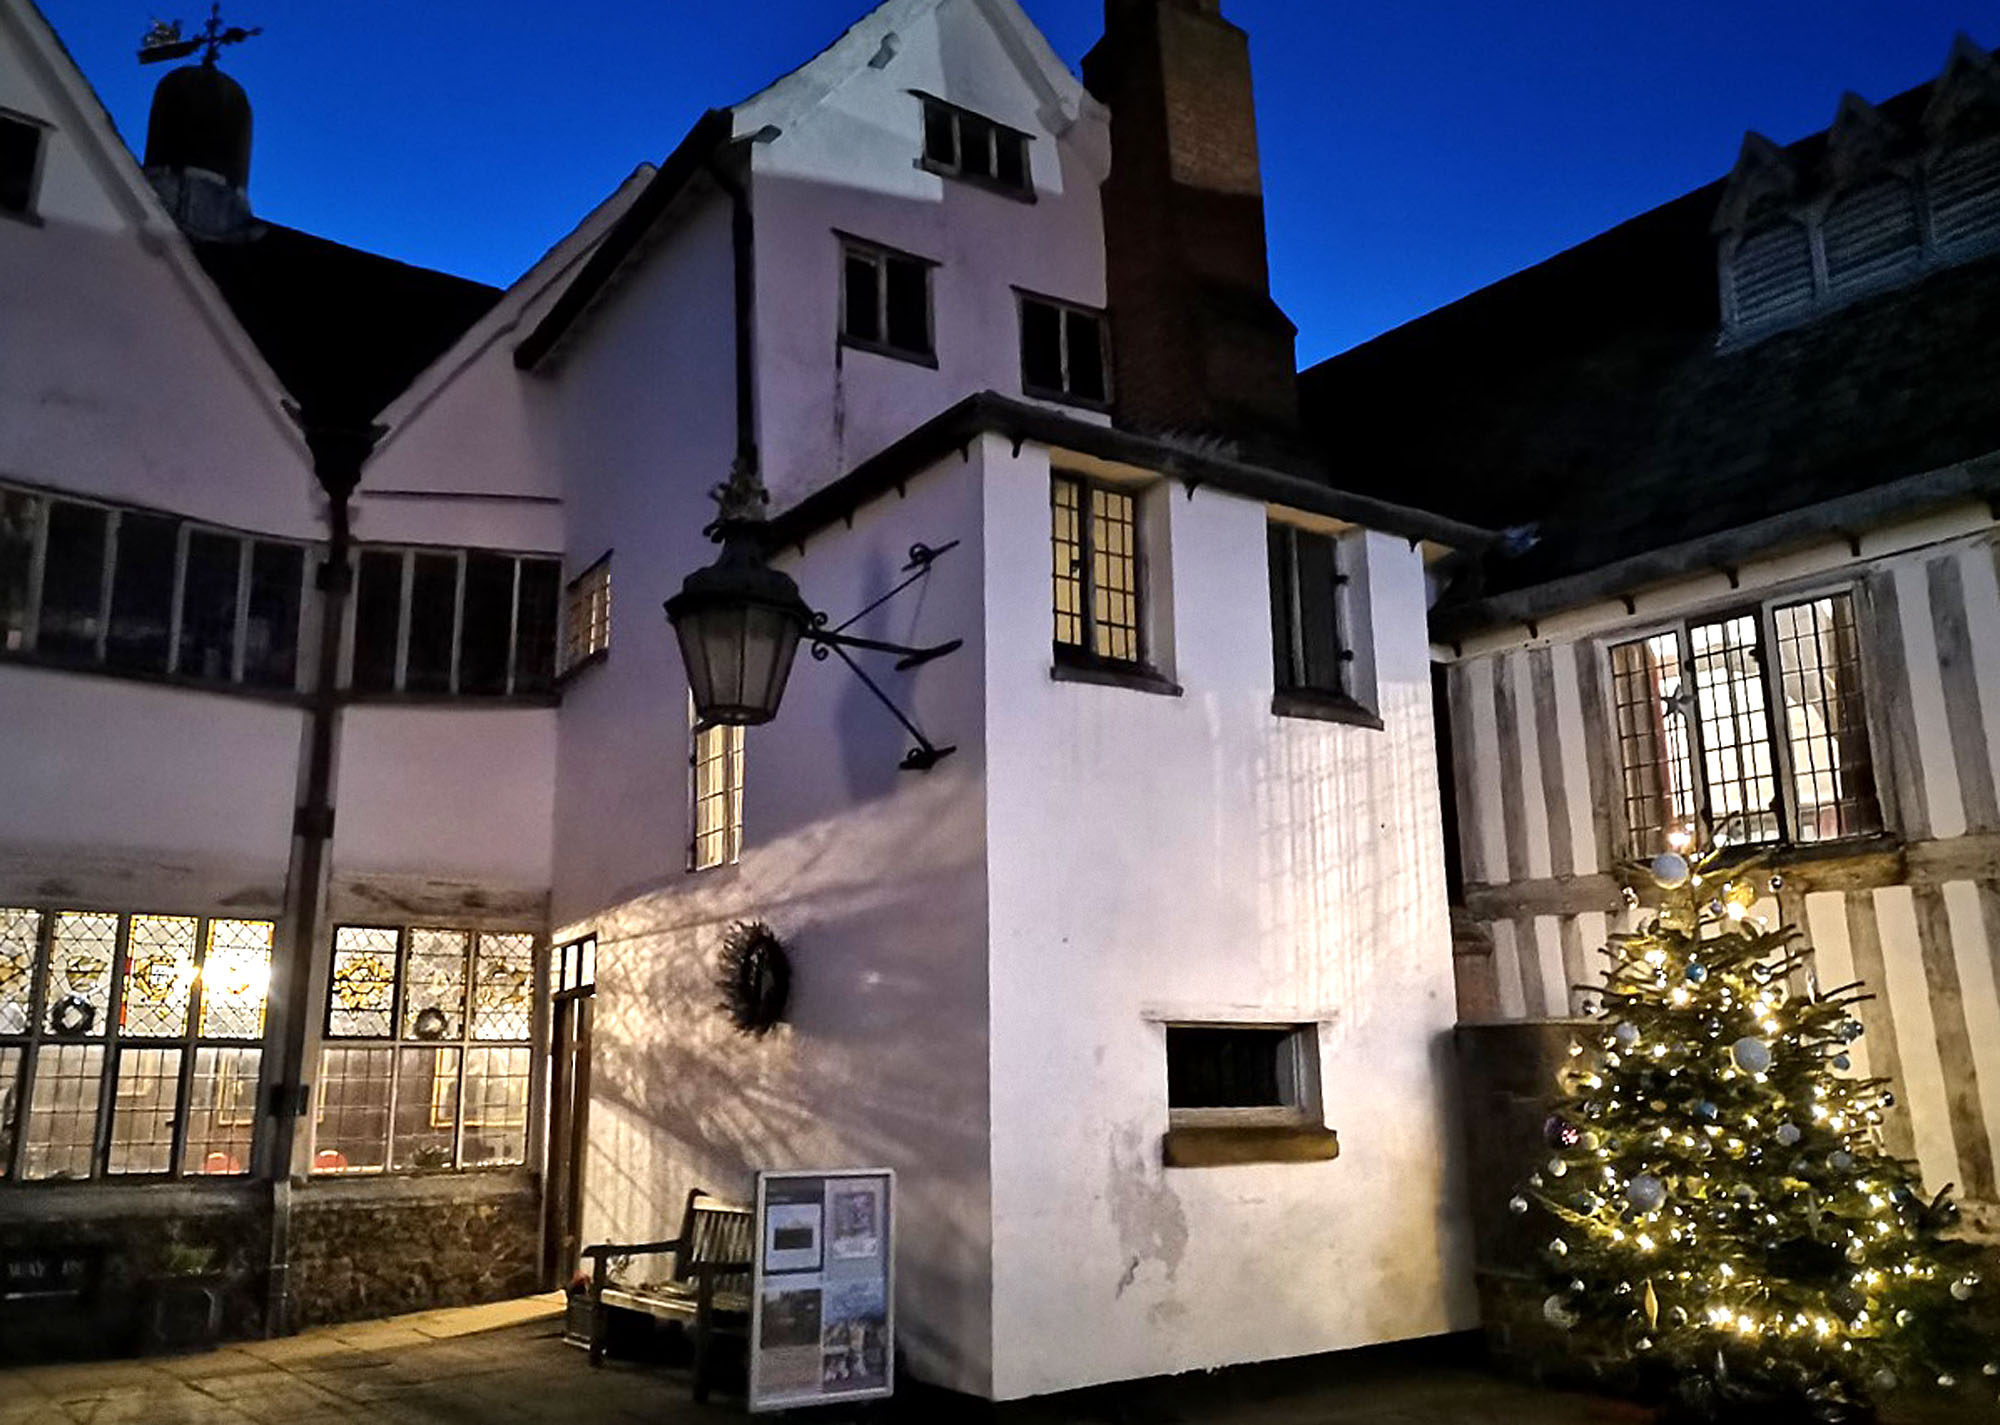 Leicester Guildhall Christmas Craft Showcase